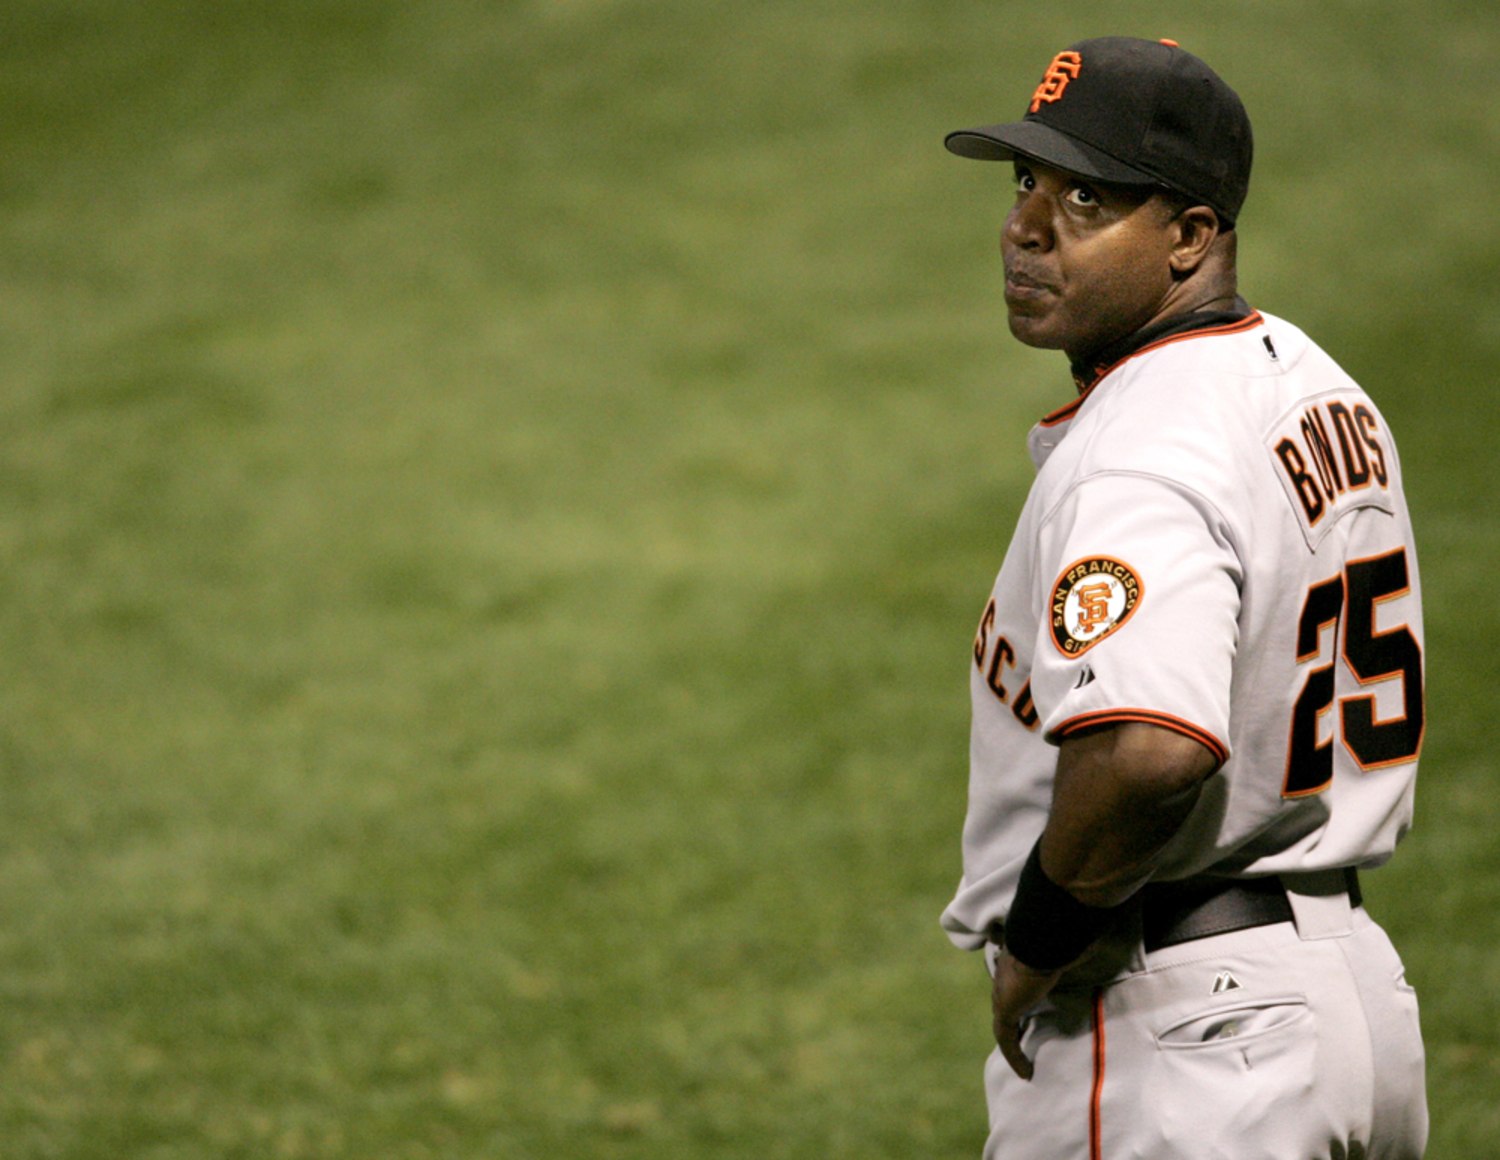 San Francisco Giants: Barry Bonds finally gets his recognition